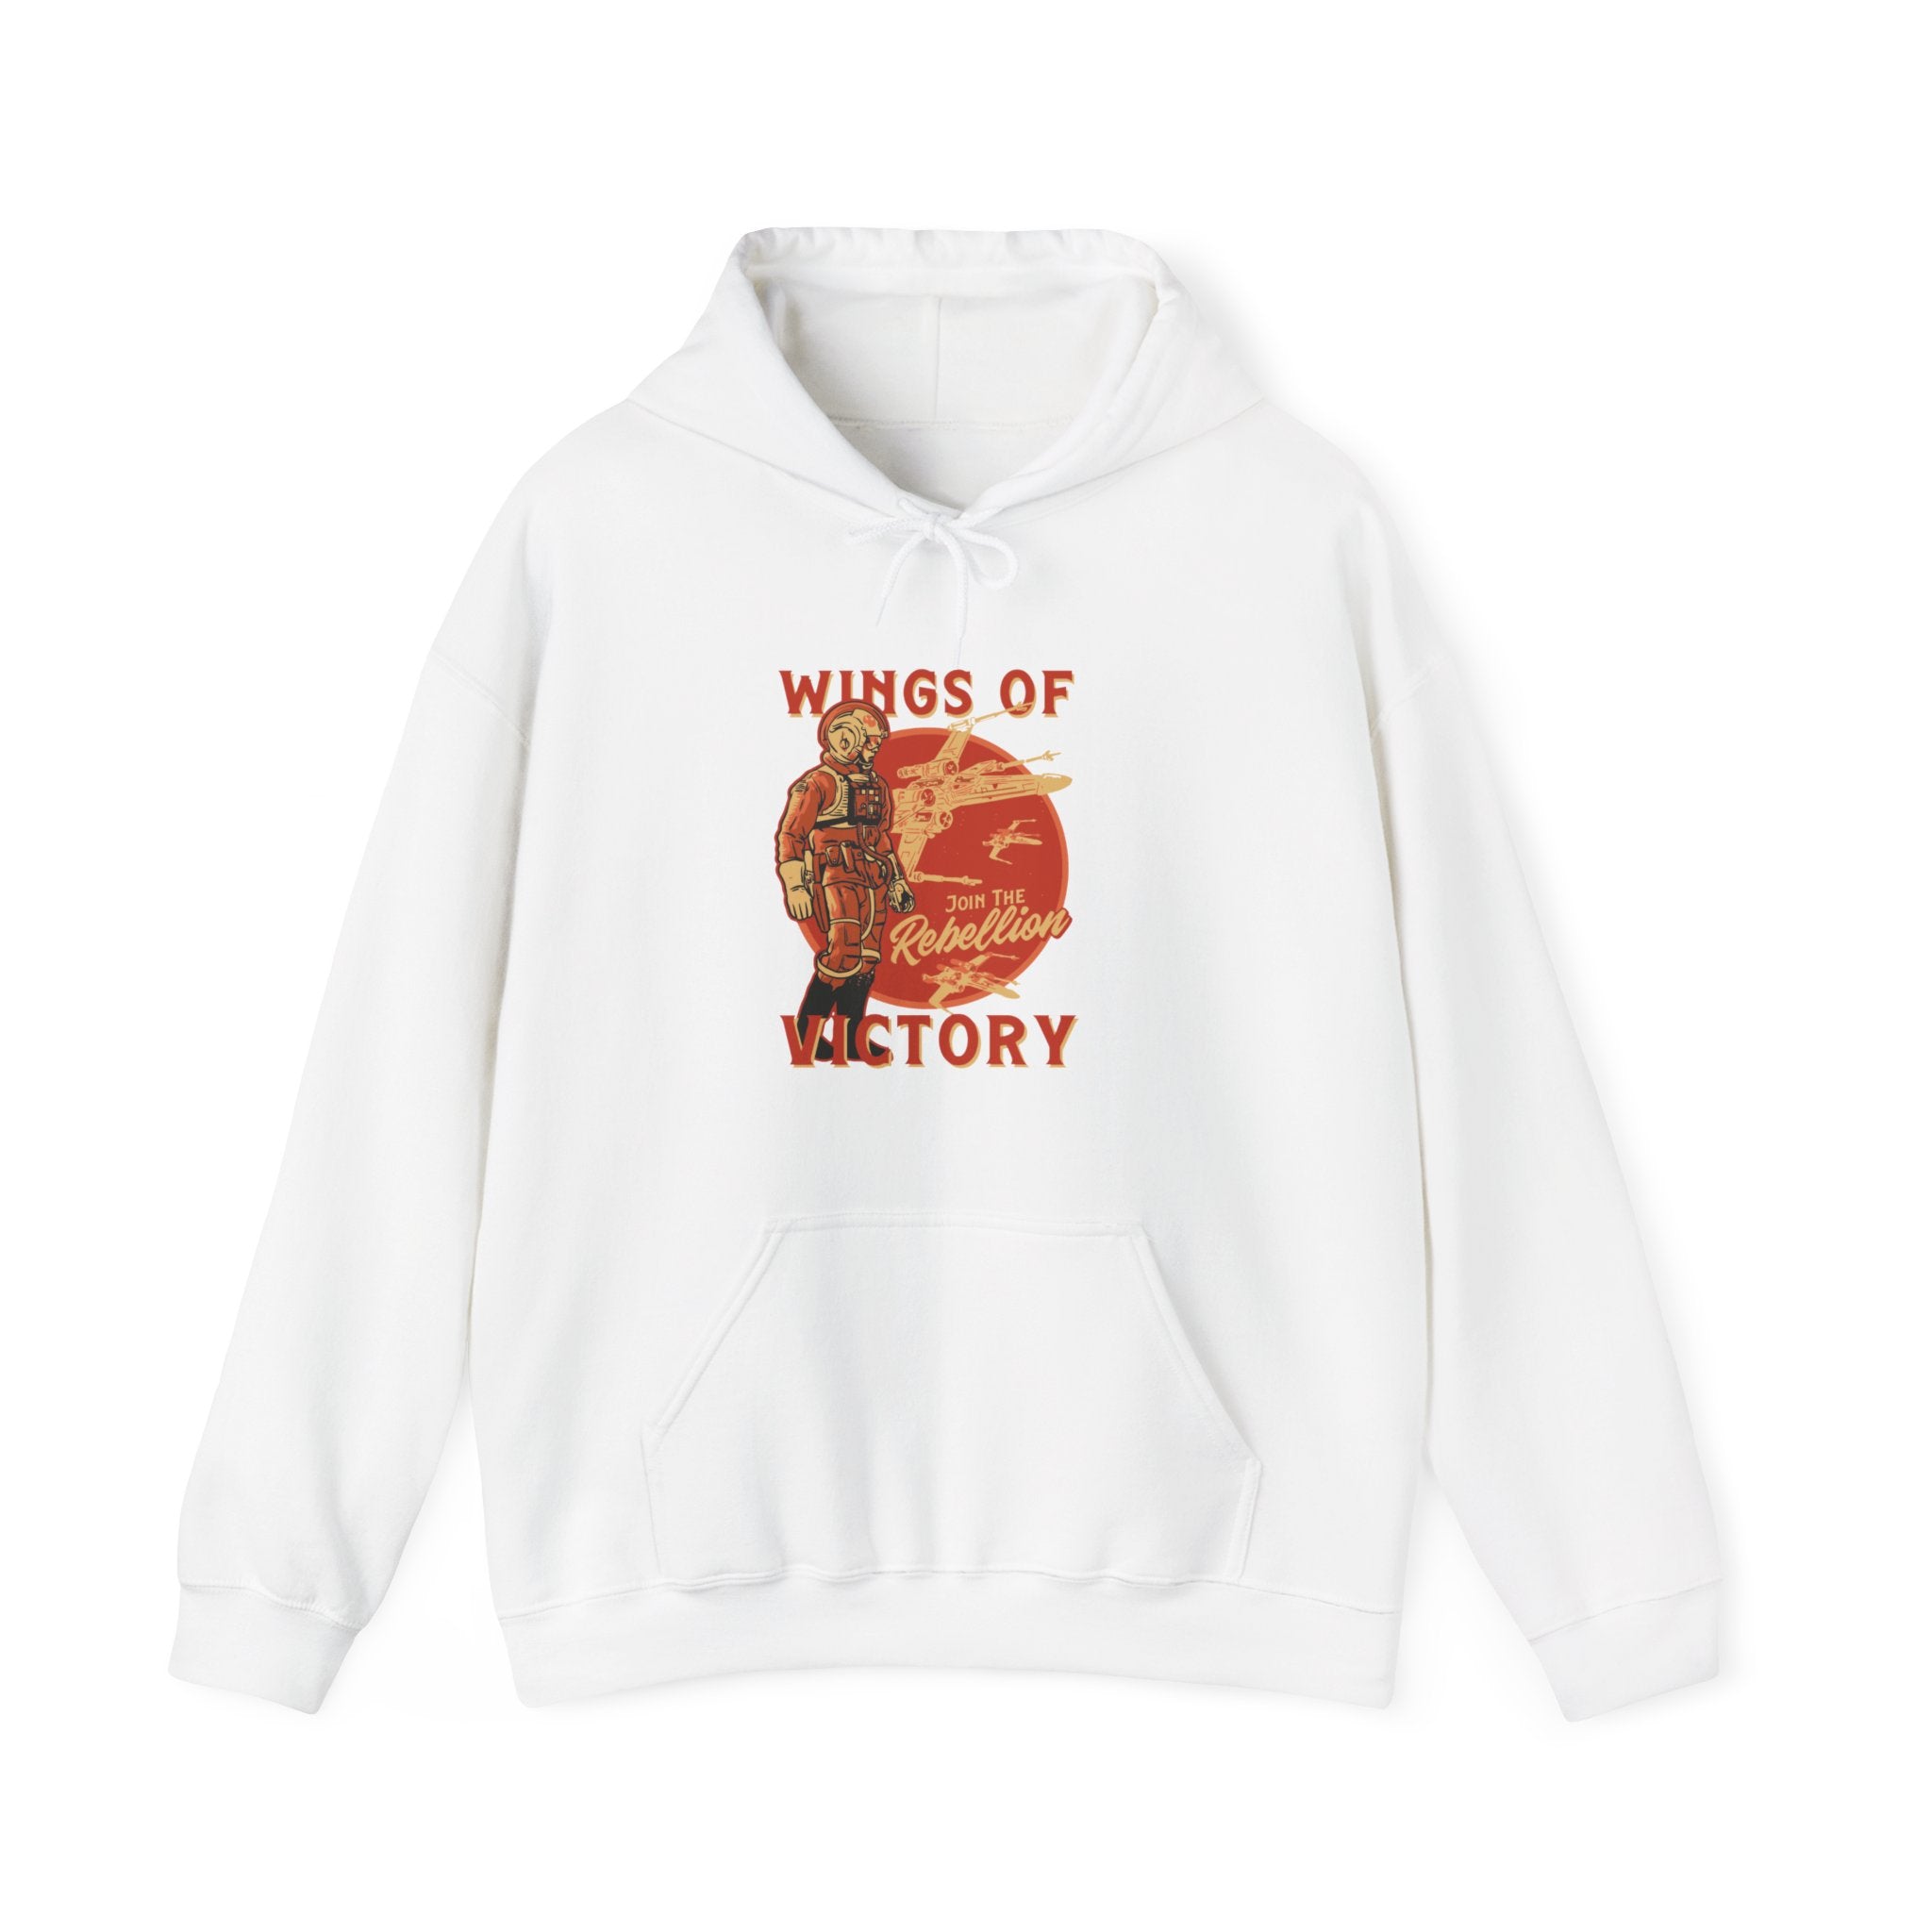 A fashionable white Wings of Victory - Hooded Sweatshirt featuring a graphic of a person in tactical gear, the text "WINGS OF VICTORY" and "Rebellion," with an aircraft soaring in the background.